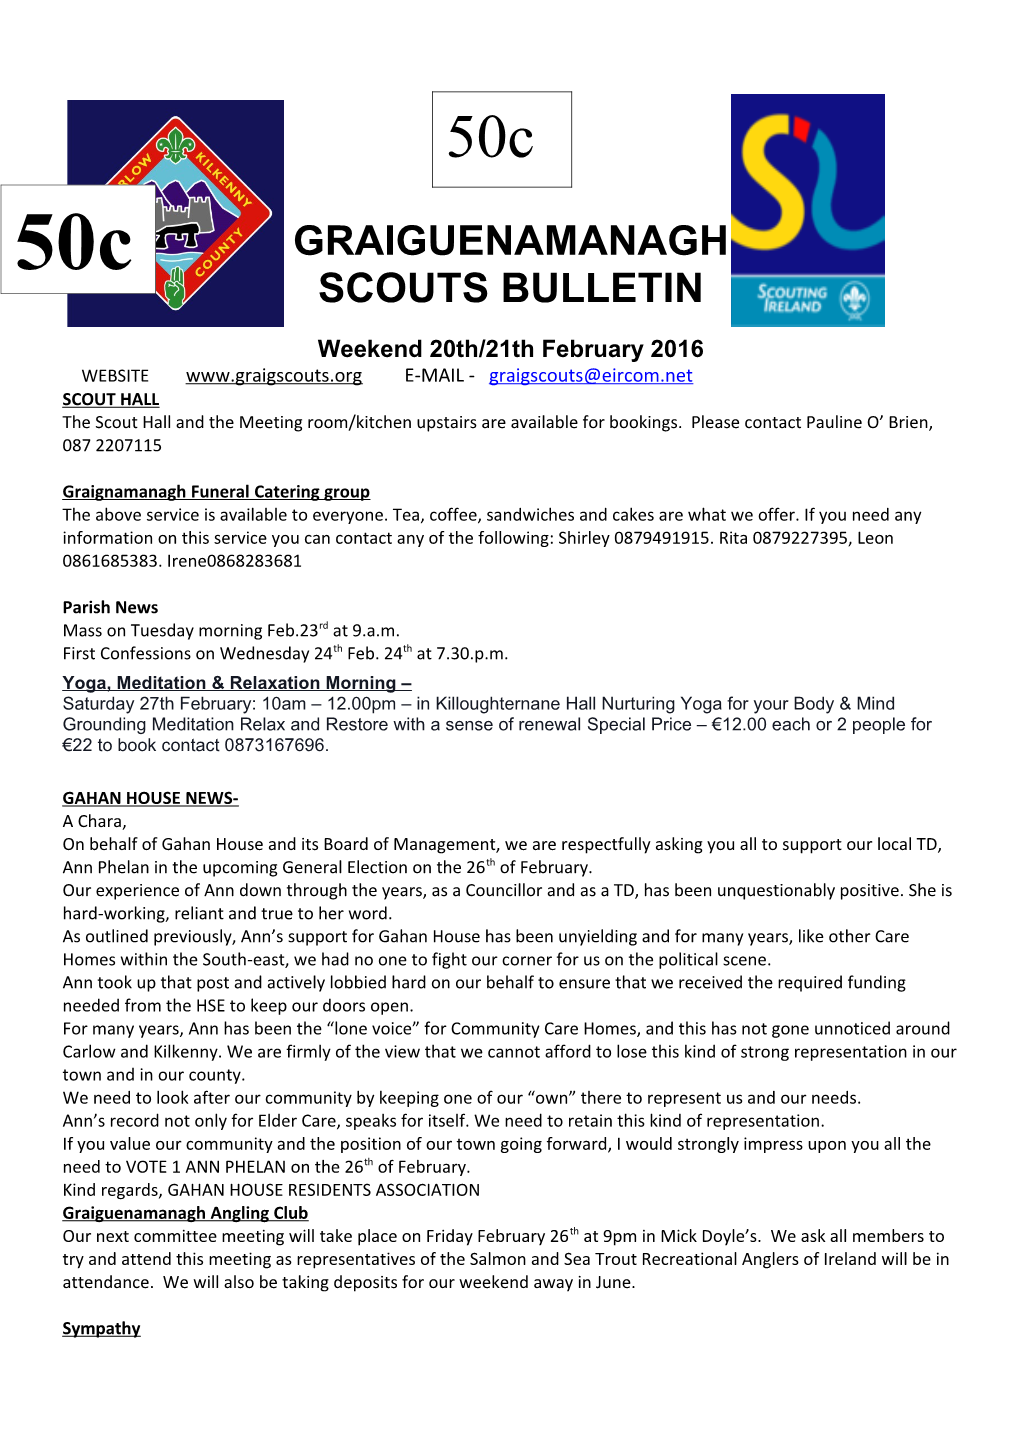 Graignamanagh Funeral Catering Group